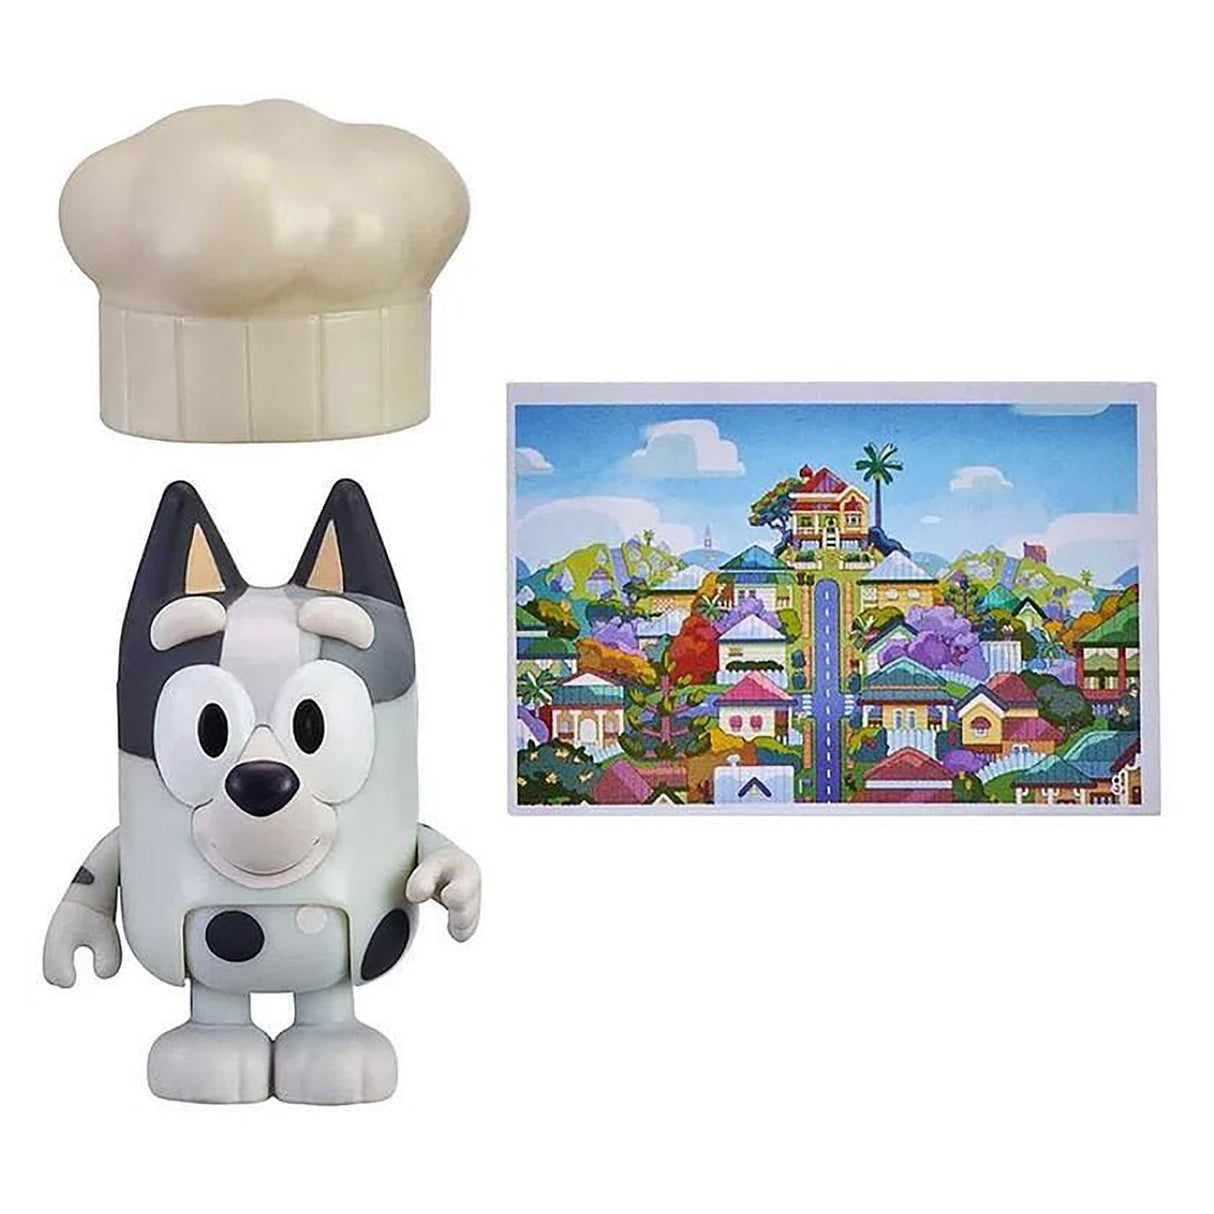 Bluey Story Starter S9 Muffin & Chef Hat (Single Pack)